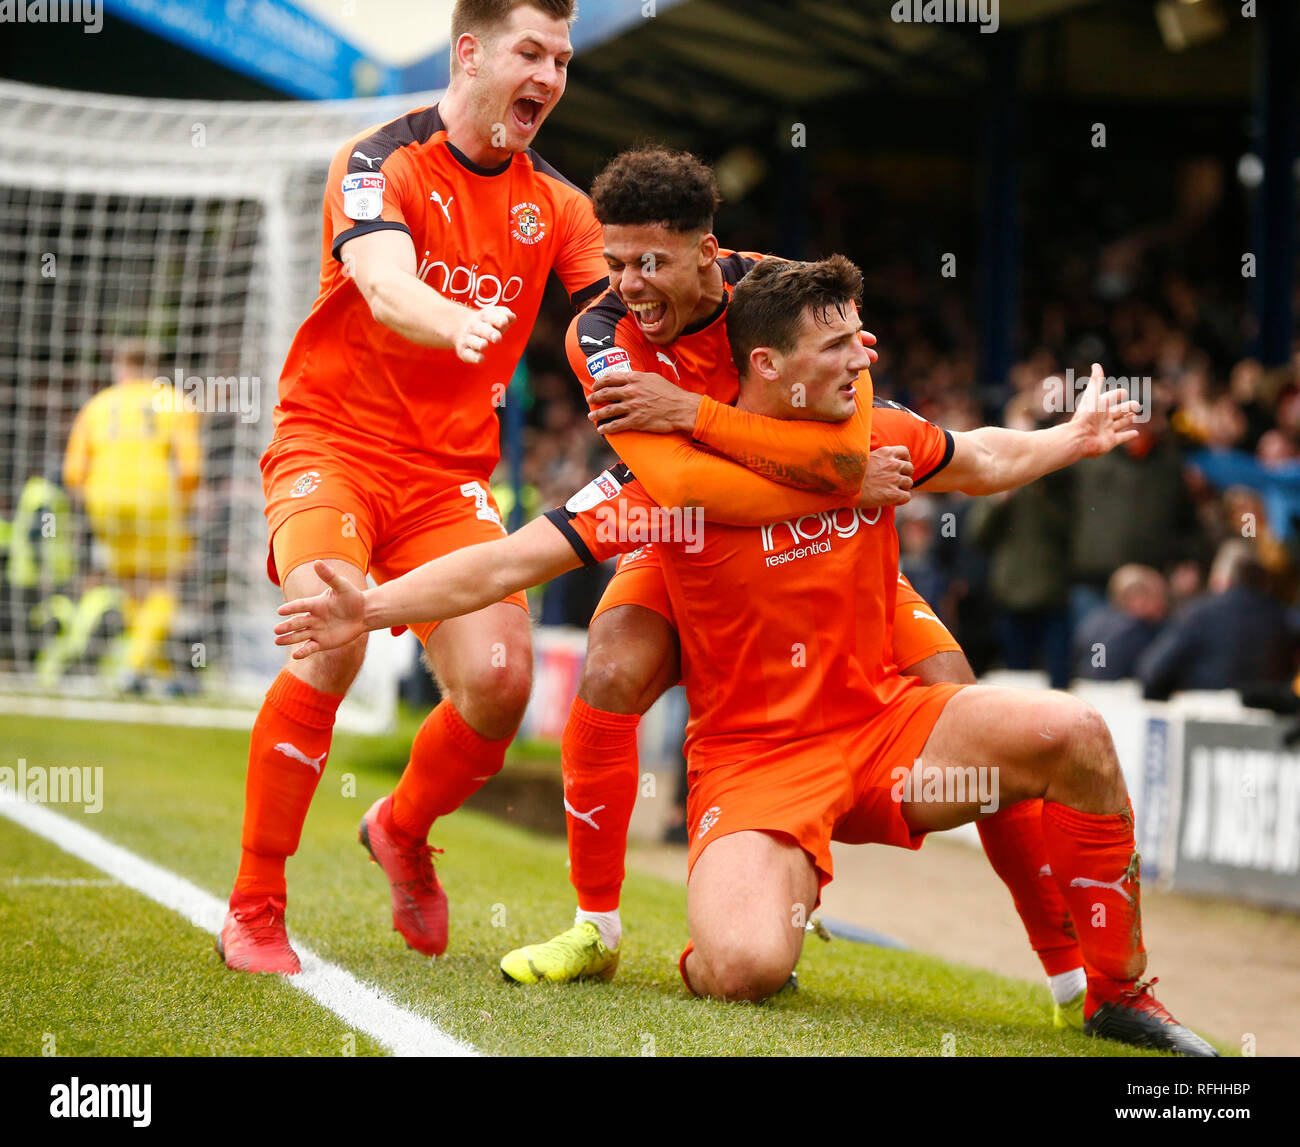 Southend, Essex, UK. 26th Jan, 2019. Southend, 26 January, 2019 Matty Pearson of Luton Town celebrates scoring his sides first goal during Sky Bet League One match between Southend United and Luton Town at Roots Hall Ground, Southend, England on 26 Jan 2019. Credit: Action Foto Sport/Alamy Live News Stock Photo